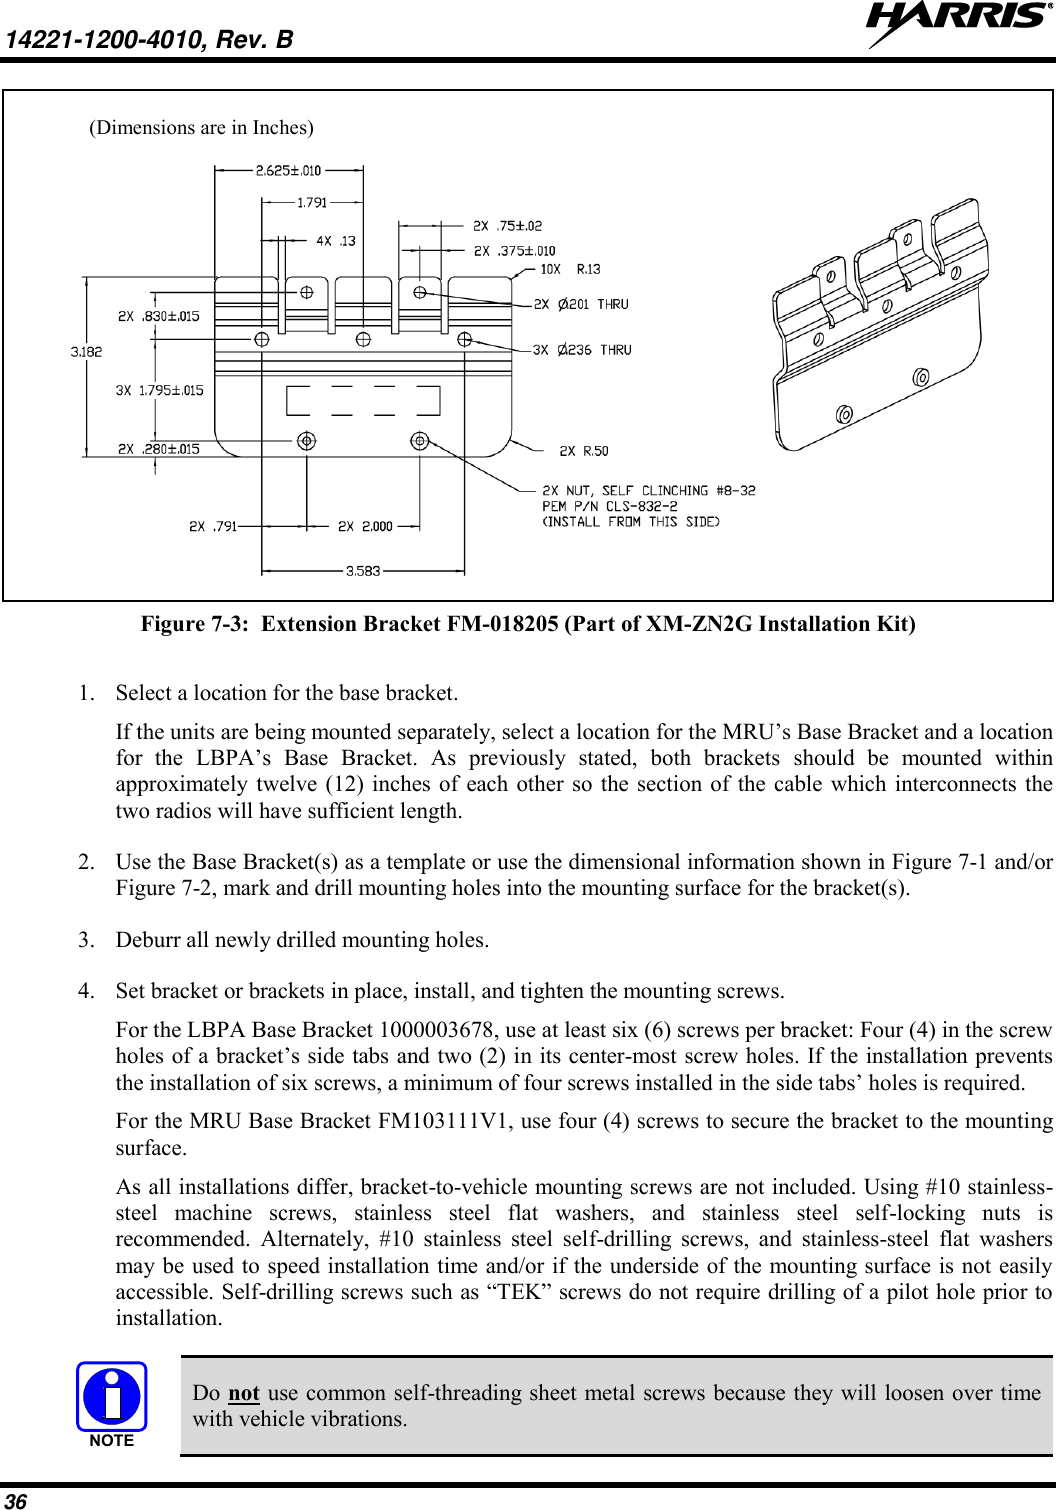 14221-1200-4010, Rev. B   36 (Dimensions are in Inches)  Figure 7-3:  Extension Bracket FM-018205 (Part of XM-ZN2G Installation Kit)  1. Select a location for the base bracket. If the units are being mounted separately, select a location for the MRU’s Base Bracket and a location for  the  LBPA’s  Base  Bracket.  As  previously  stated,  both  brackets  should  be  mounted  within approximately twelve (12) inches of each other so the section of  the cable which interconnects the two radios will have sufficient length.  2. Use the Base Bracket(s) as a template or use the dimensional information shown in Figure 7-1 and/or Figure 7-2, mark and drill mounting holes into the mounting surface for the bracket(s). 3. Deburr all newly drilled mounting holes. 4. Set bracket or brackets in place, install, and tighten the mounting screws. For the LBPA Base Bracket 1000003678, use at least six (6) screws per bracket: Four (4) in the screw holes of a bracket’s side tabs and two (2) in its center-most screw holes. If the installation prevents the installation of six screws, a minimum of four screws installed in the side tabs’ holes is required. For the MRU Base Bracket FM103111V1, use four (4) screws to secure the bracket to the mounting surface. As all installations differ, bracket-to-vehicle mounting screws are not included. Using #10 stainless-steel  machine  screws,  stainless  steel  flat  washers,  and  stainless  steel  self-locking  nuts  is recommended.  Alternately,  #10  stainless  steel  self-drilling  screws,  and  stainless-steel  flat  washers may be used to speed installation time and/or if the underside of the mounting surface is not easily accessible. Self-drilling screws such as “TEK” screws do not require drilling of a pilot hole prior to installation.    Do not use common self-threading sheet metal screws because they will loosen over time with vehicle vibrations. NOTE